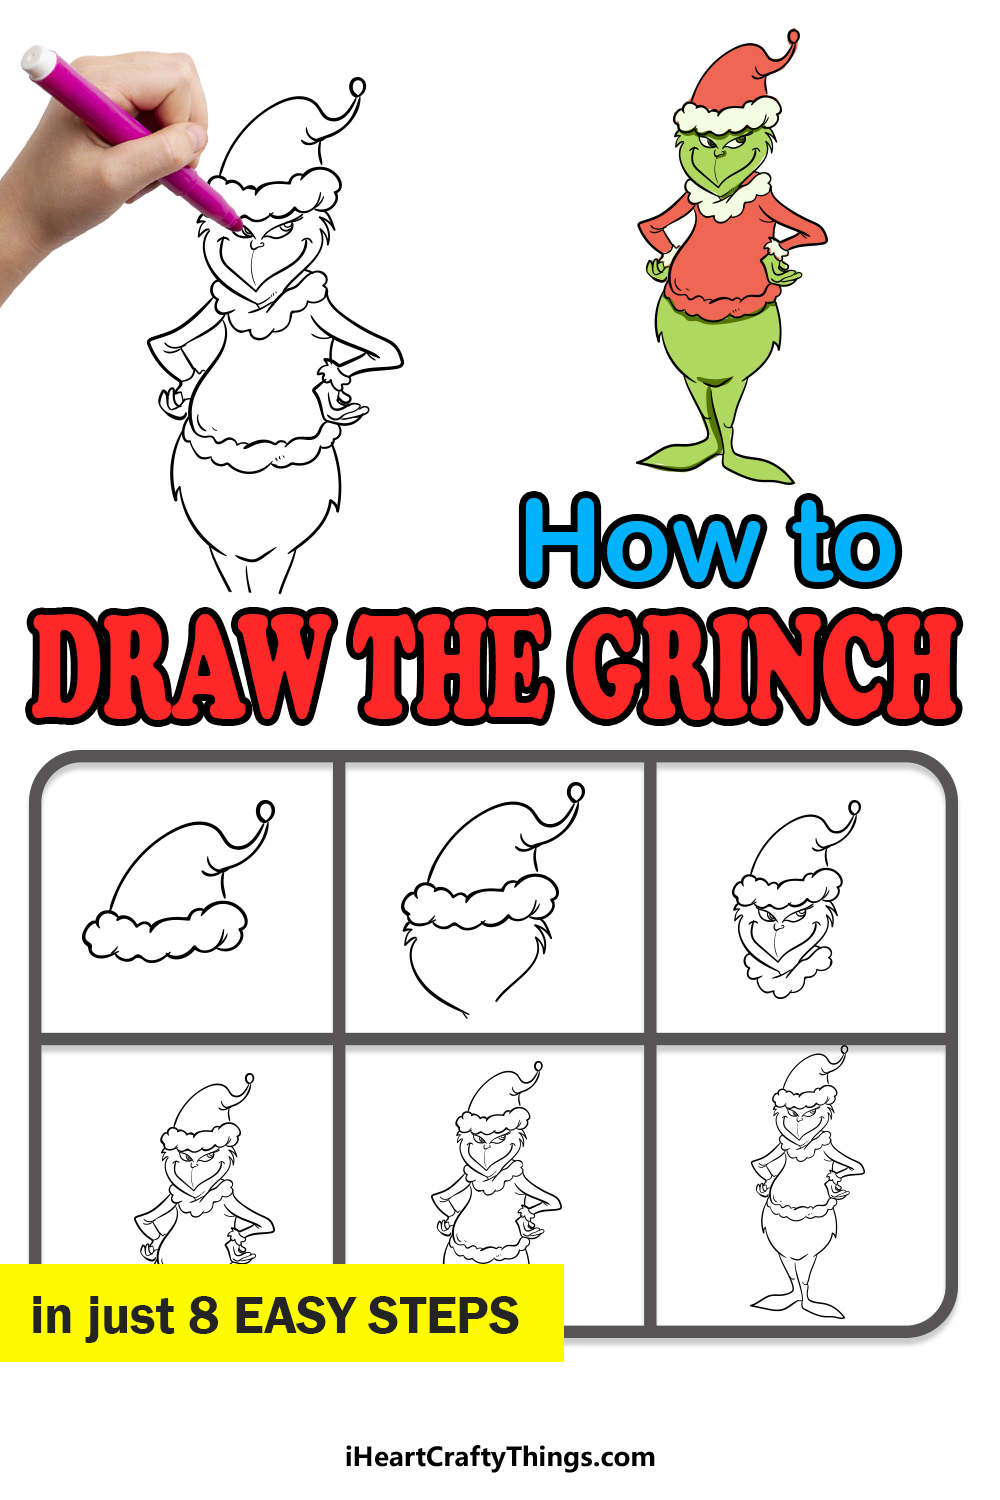 how to draw the grinch in 8 easy steps